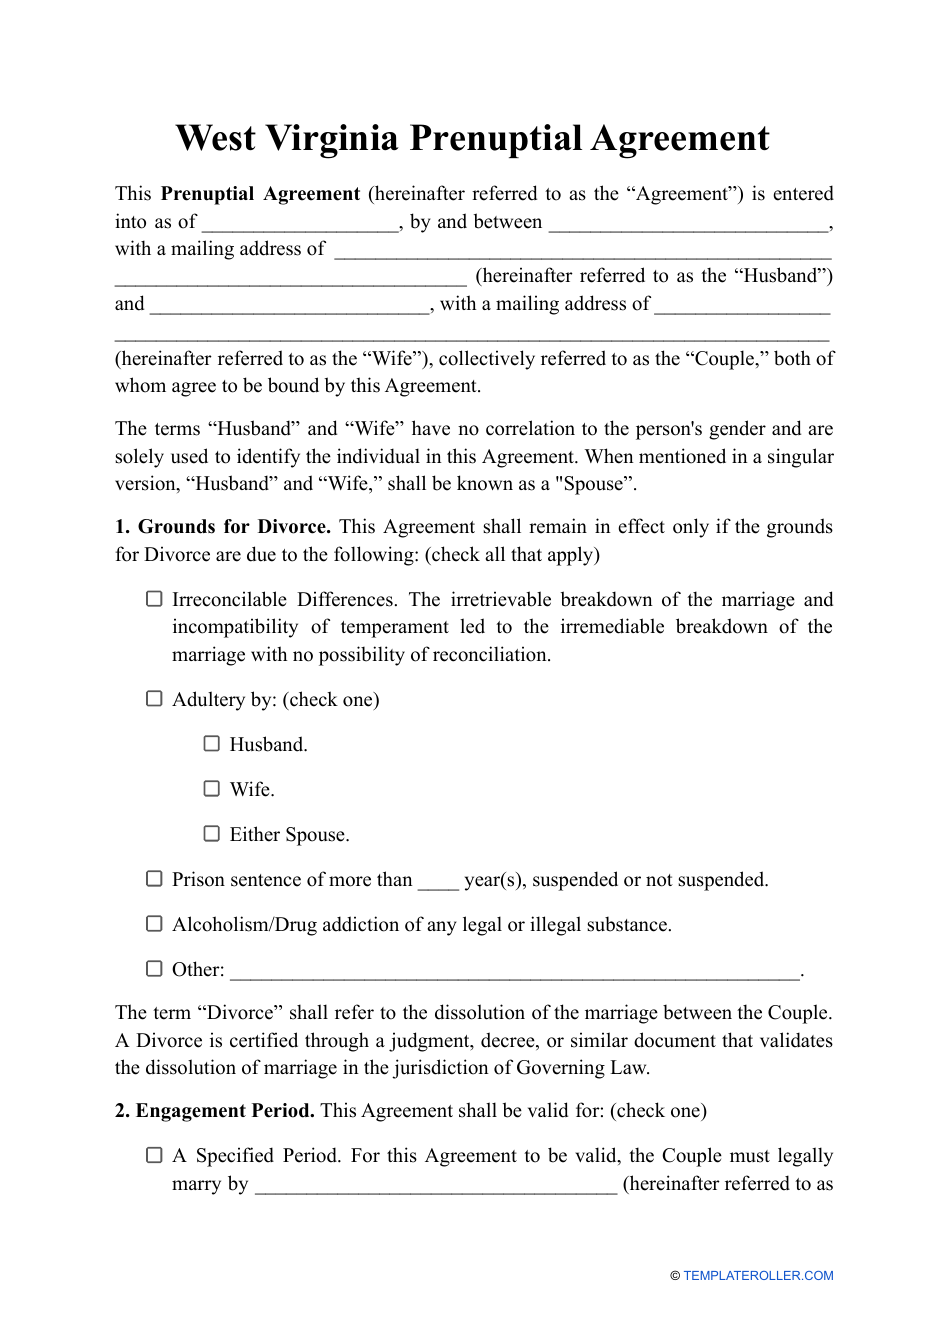 Prenuptial Agreement Template - West Virginia, Page 1